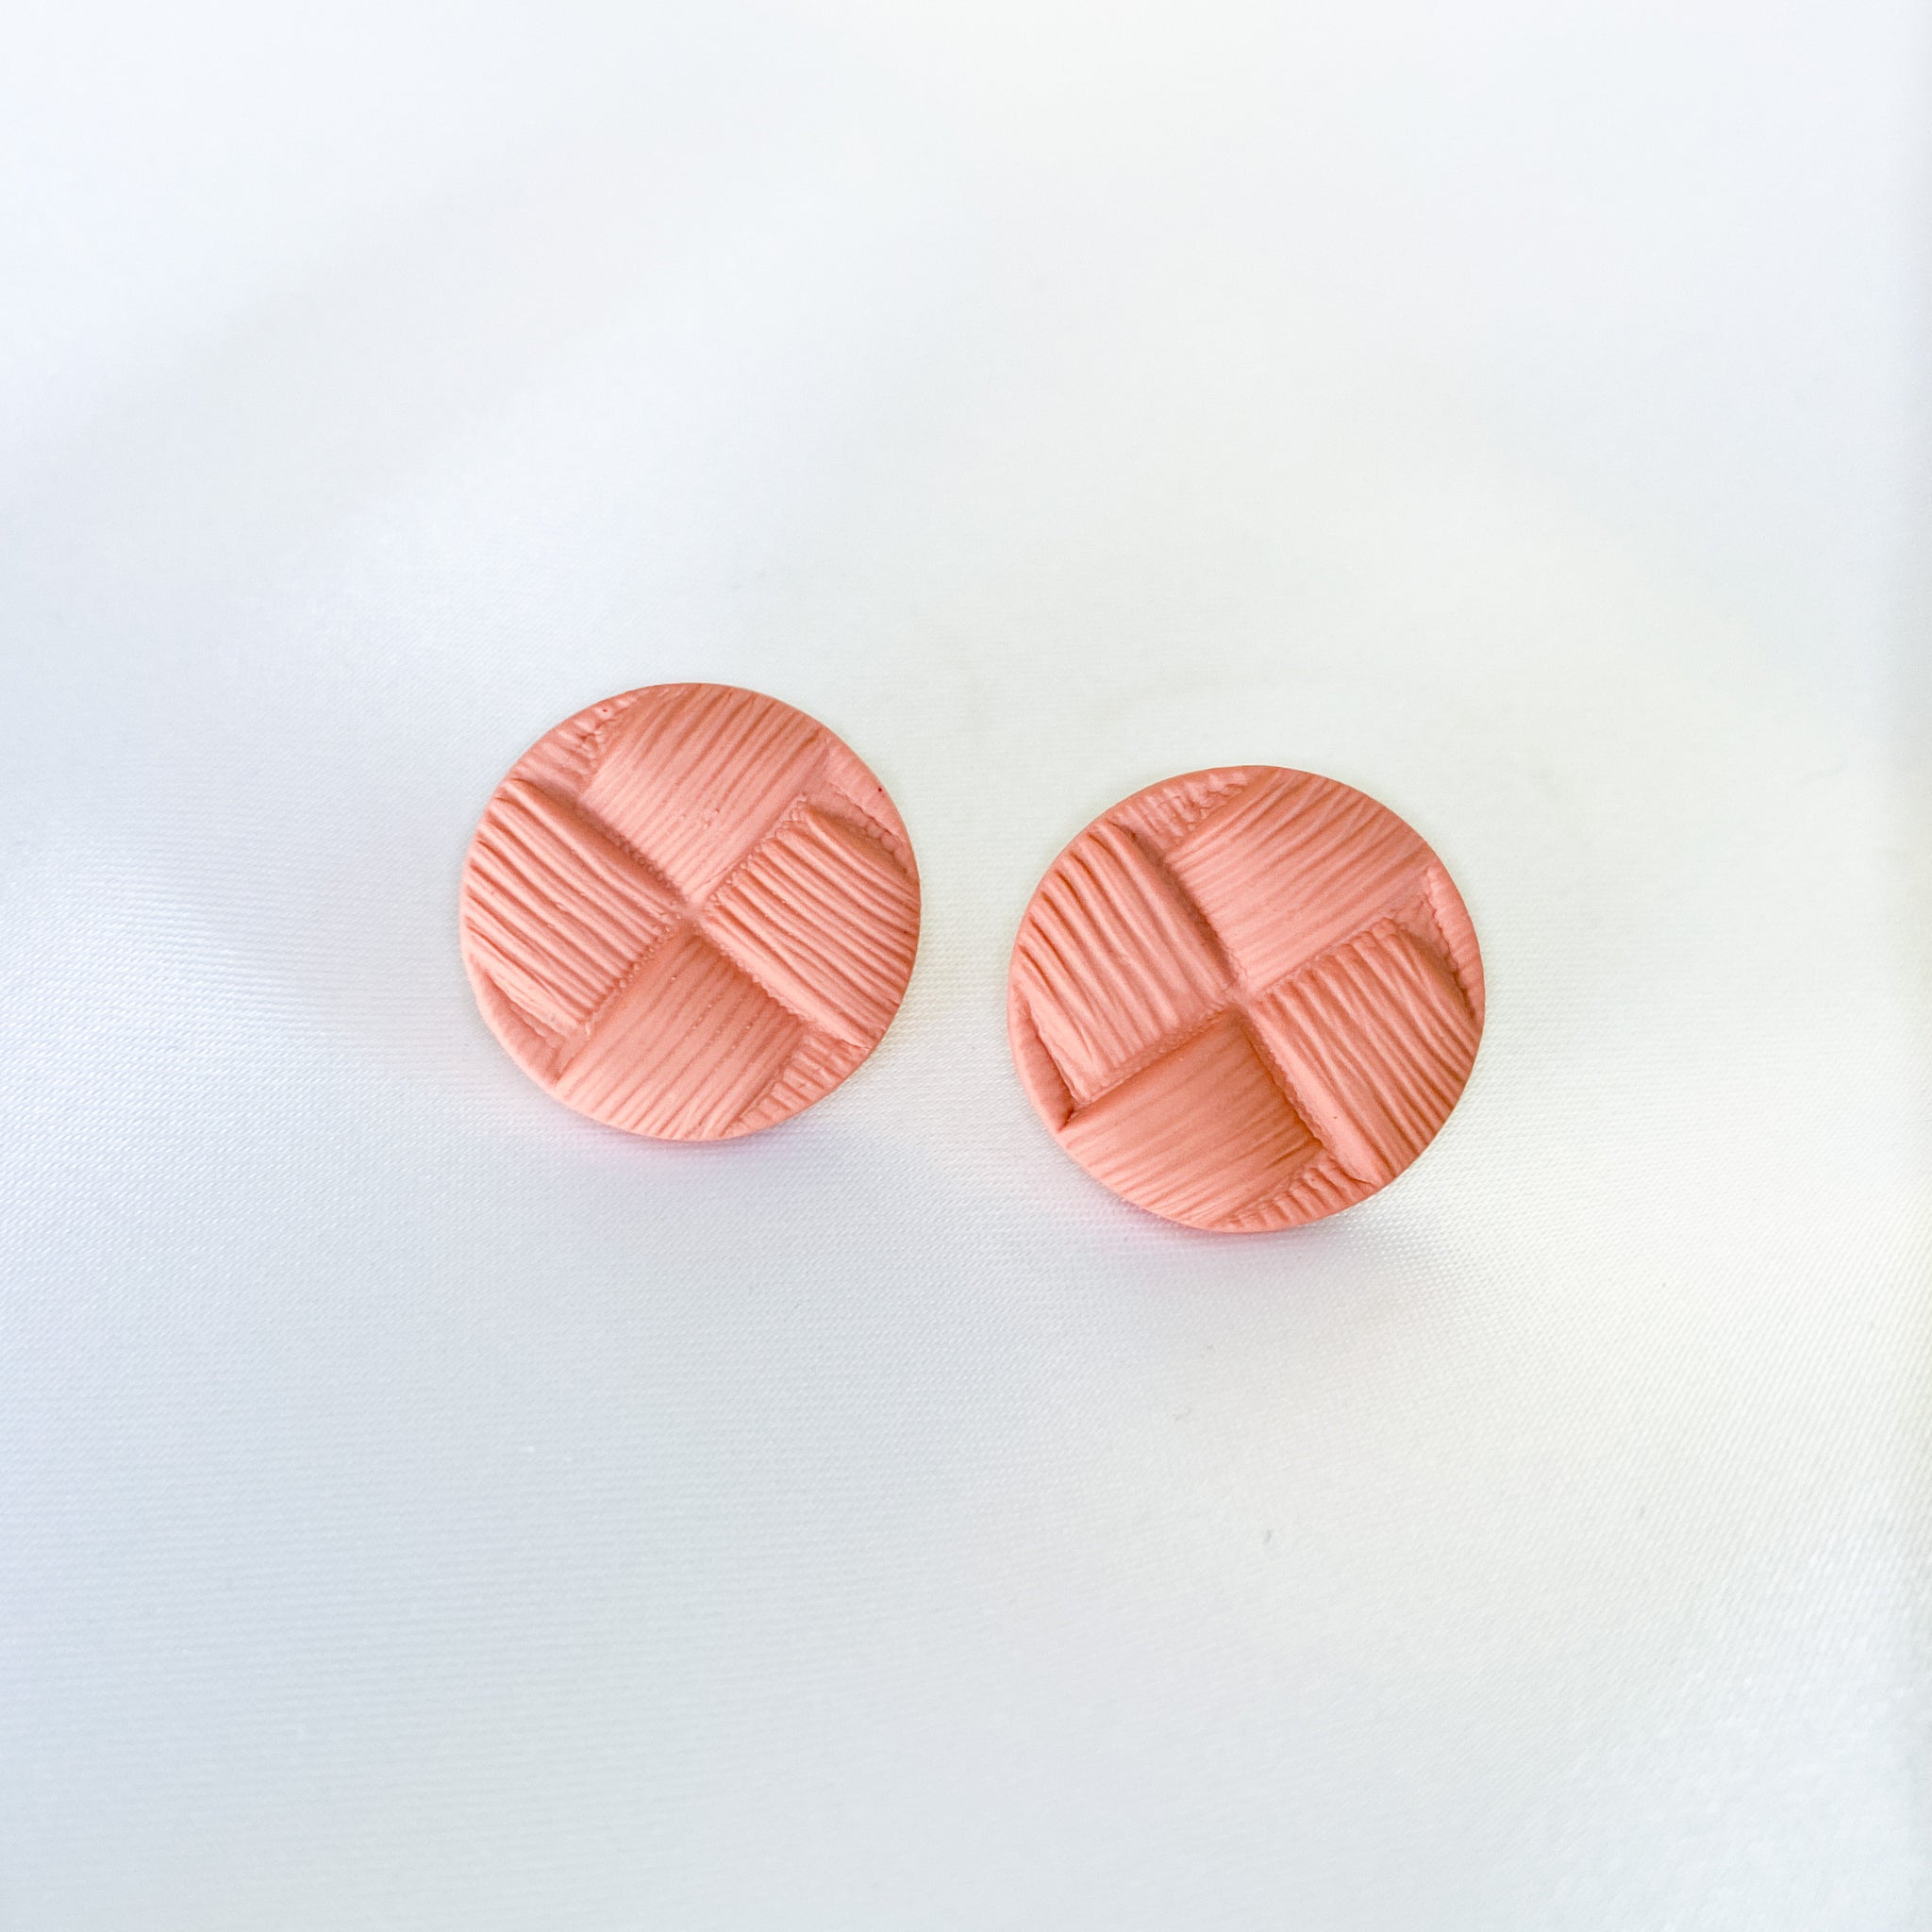 Salmon colored button stud earrings handmade from polymer clay